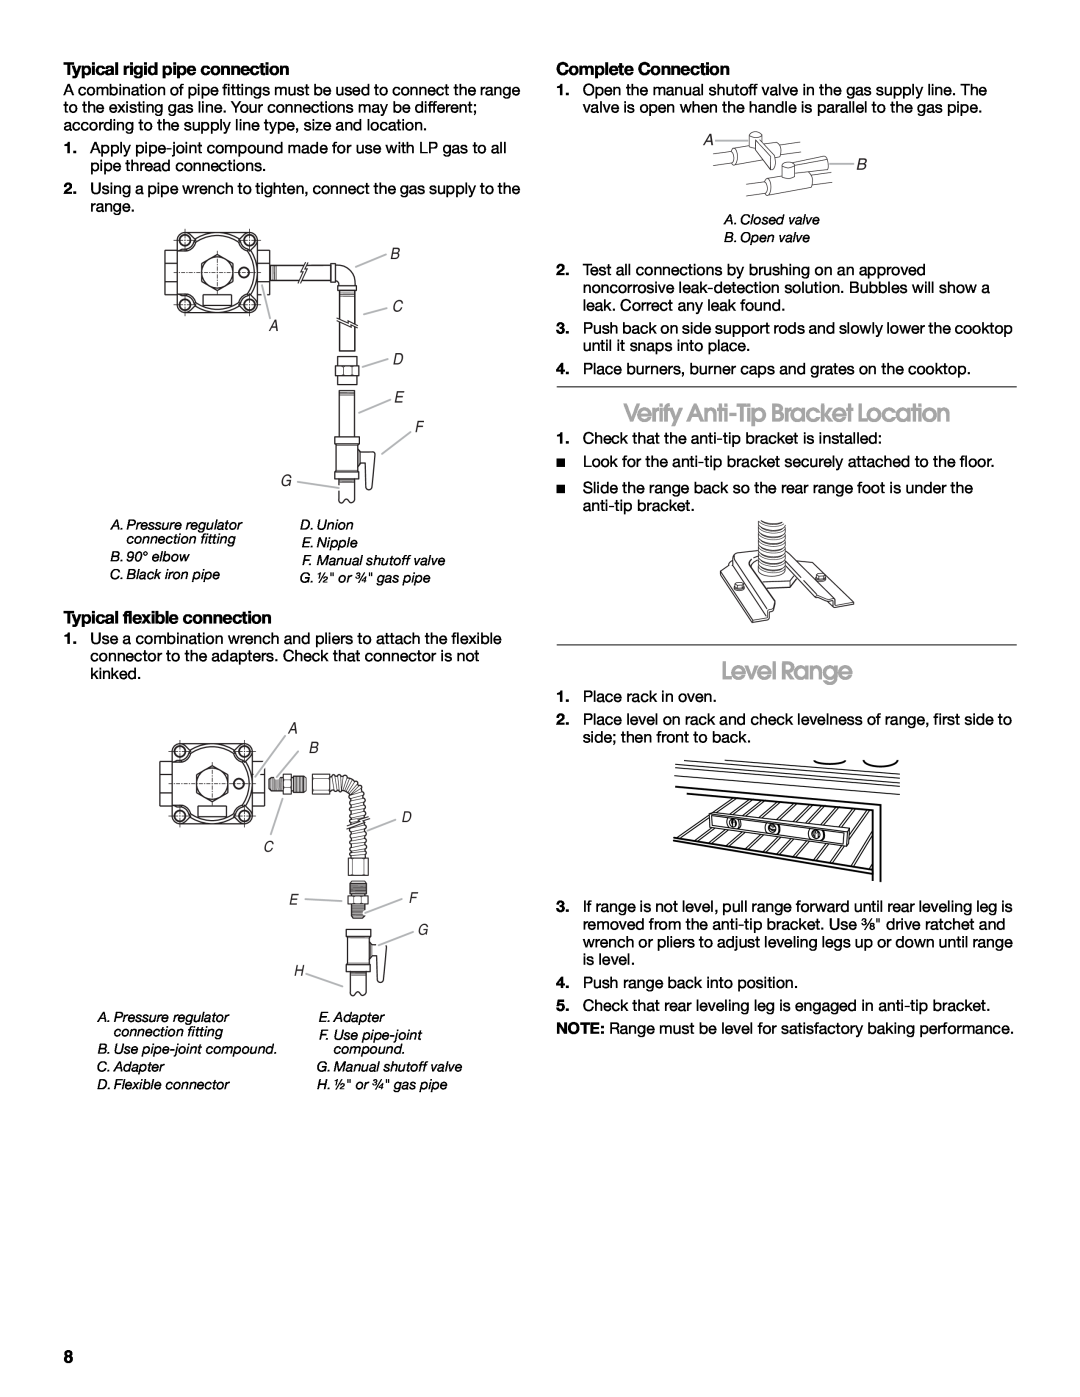 Whirlpool W10325493A Verify Anti-Tip Bracket Location, Level Range, Typical rigid pipe connection, Complete Connection 